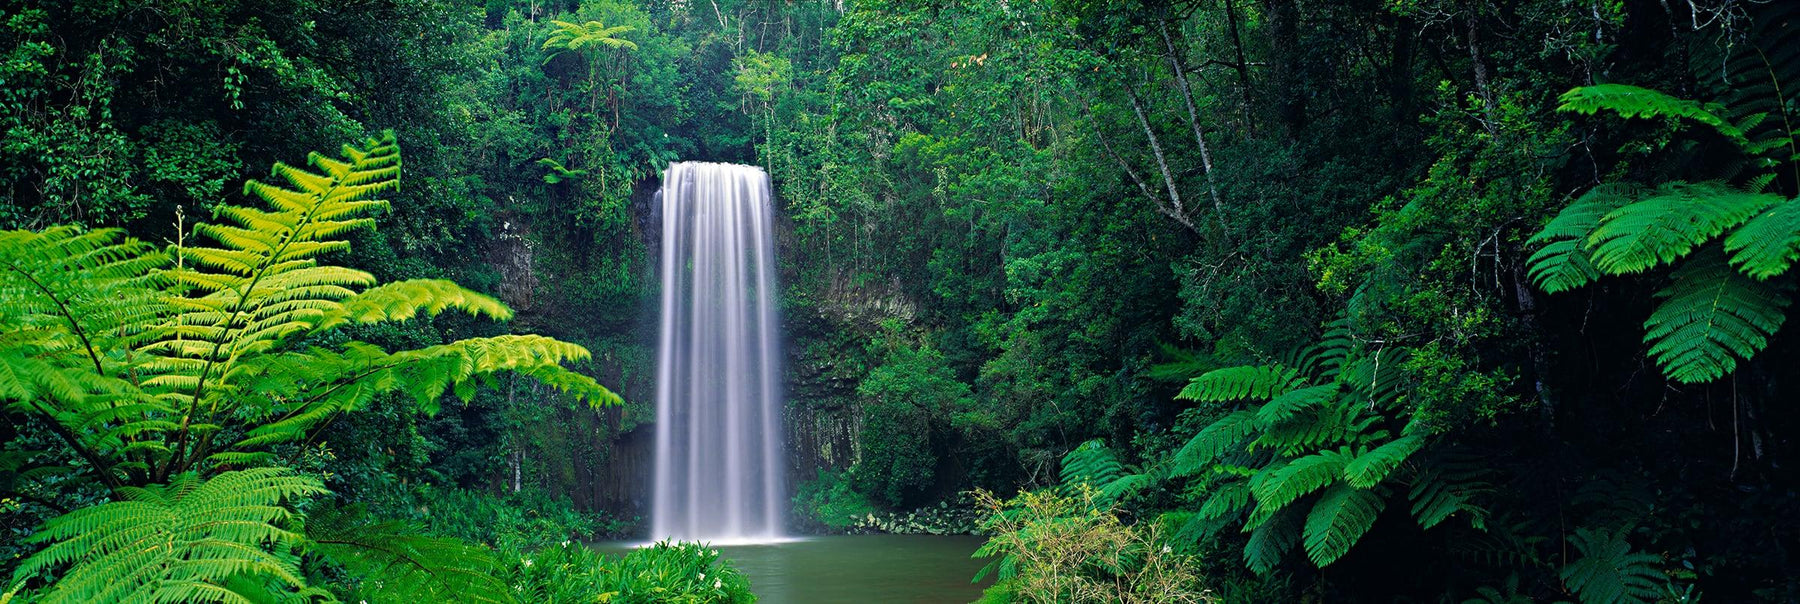 Waterfall pouring into a river in the tropical rainforests of Queensland, Australia